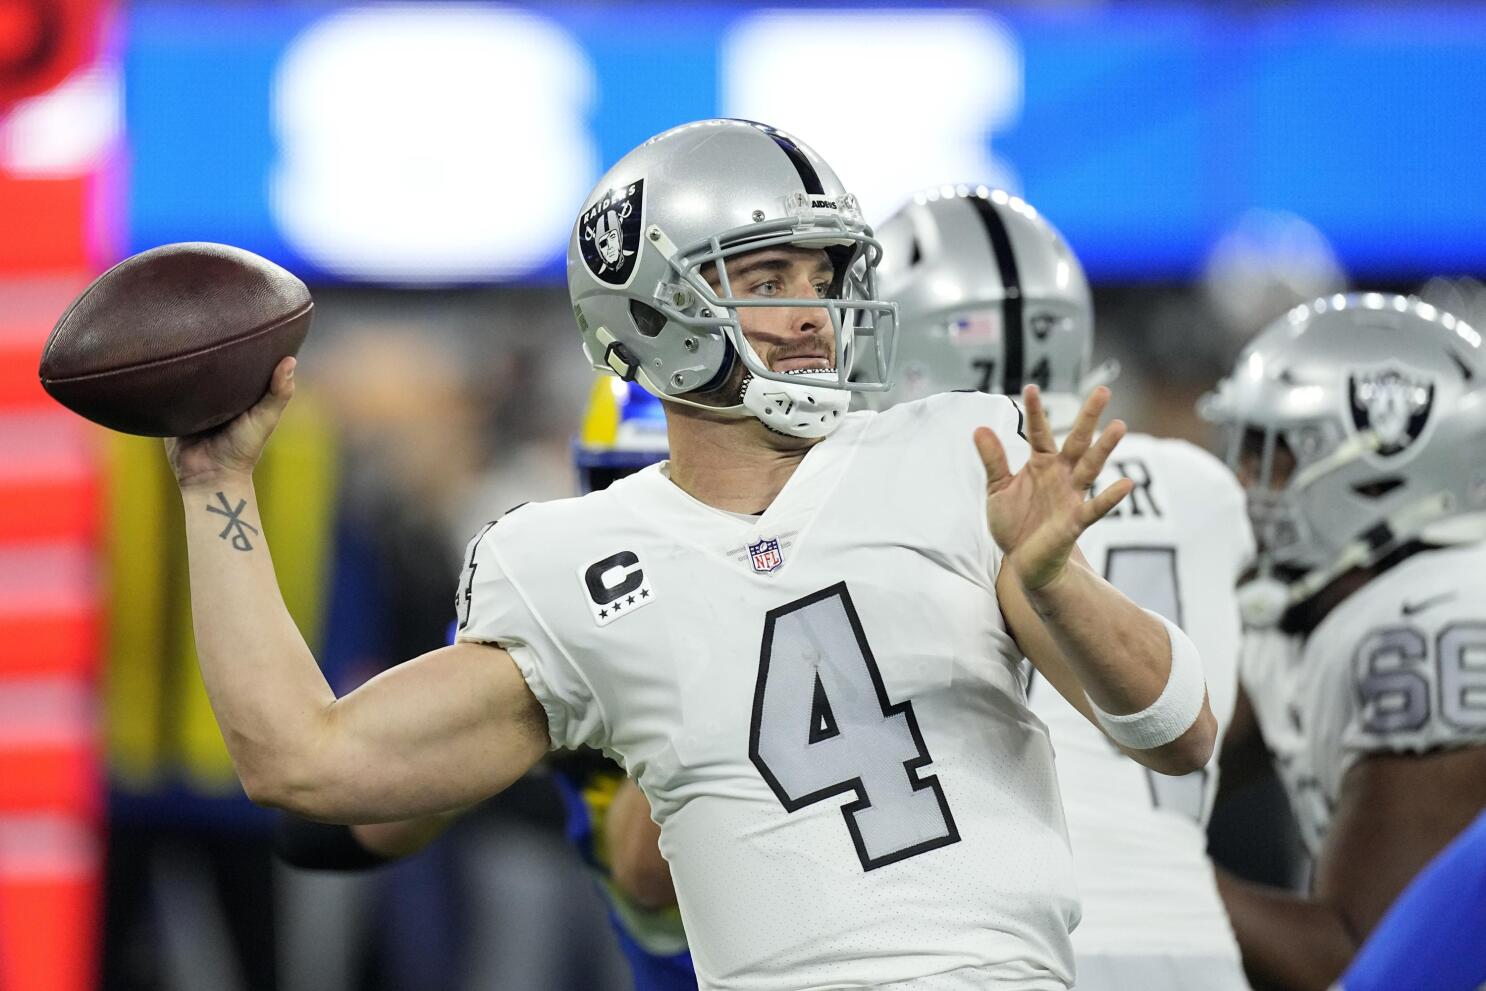 Derek Carr hits open market after release from Raiders